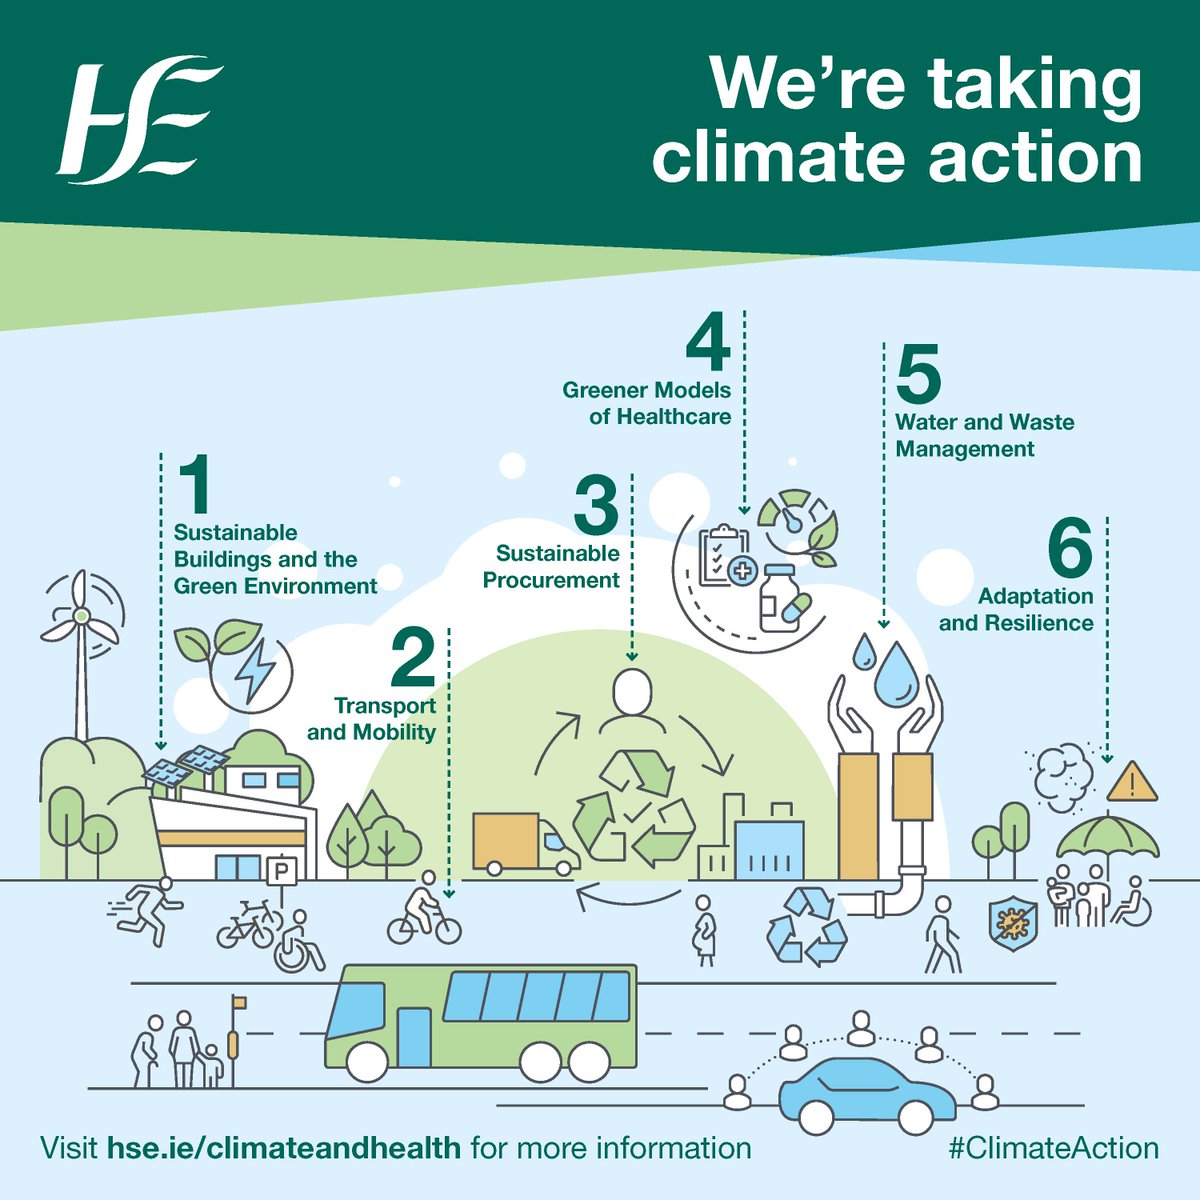 Ireland has set an ambitious, yet achievable, goal to become carbon neutral by 2050. But action must start now and we all need to work together to get there. See what actions you can take to start making a difference. We’re taking #ClimateAction. Are you? bit.ly/3uaOv0t